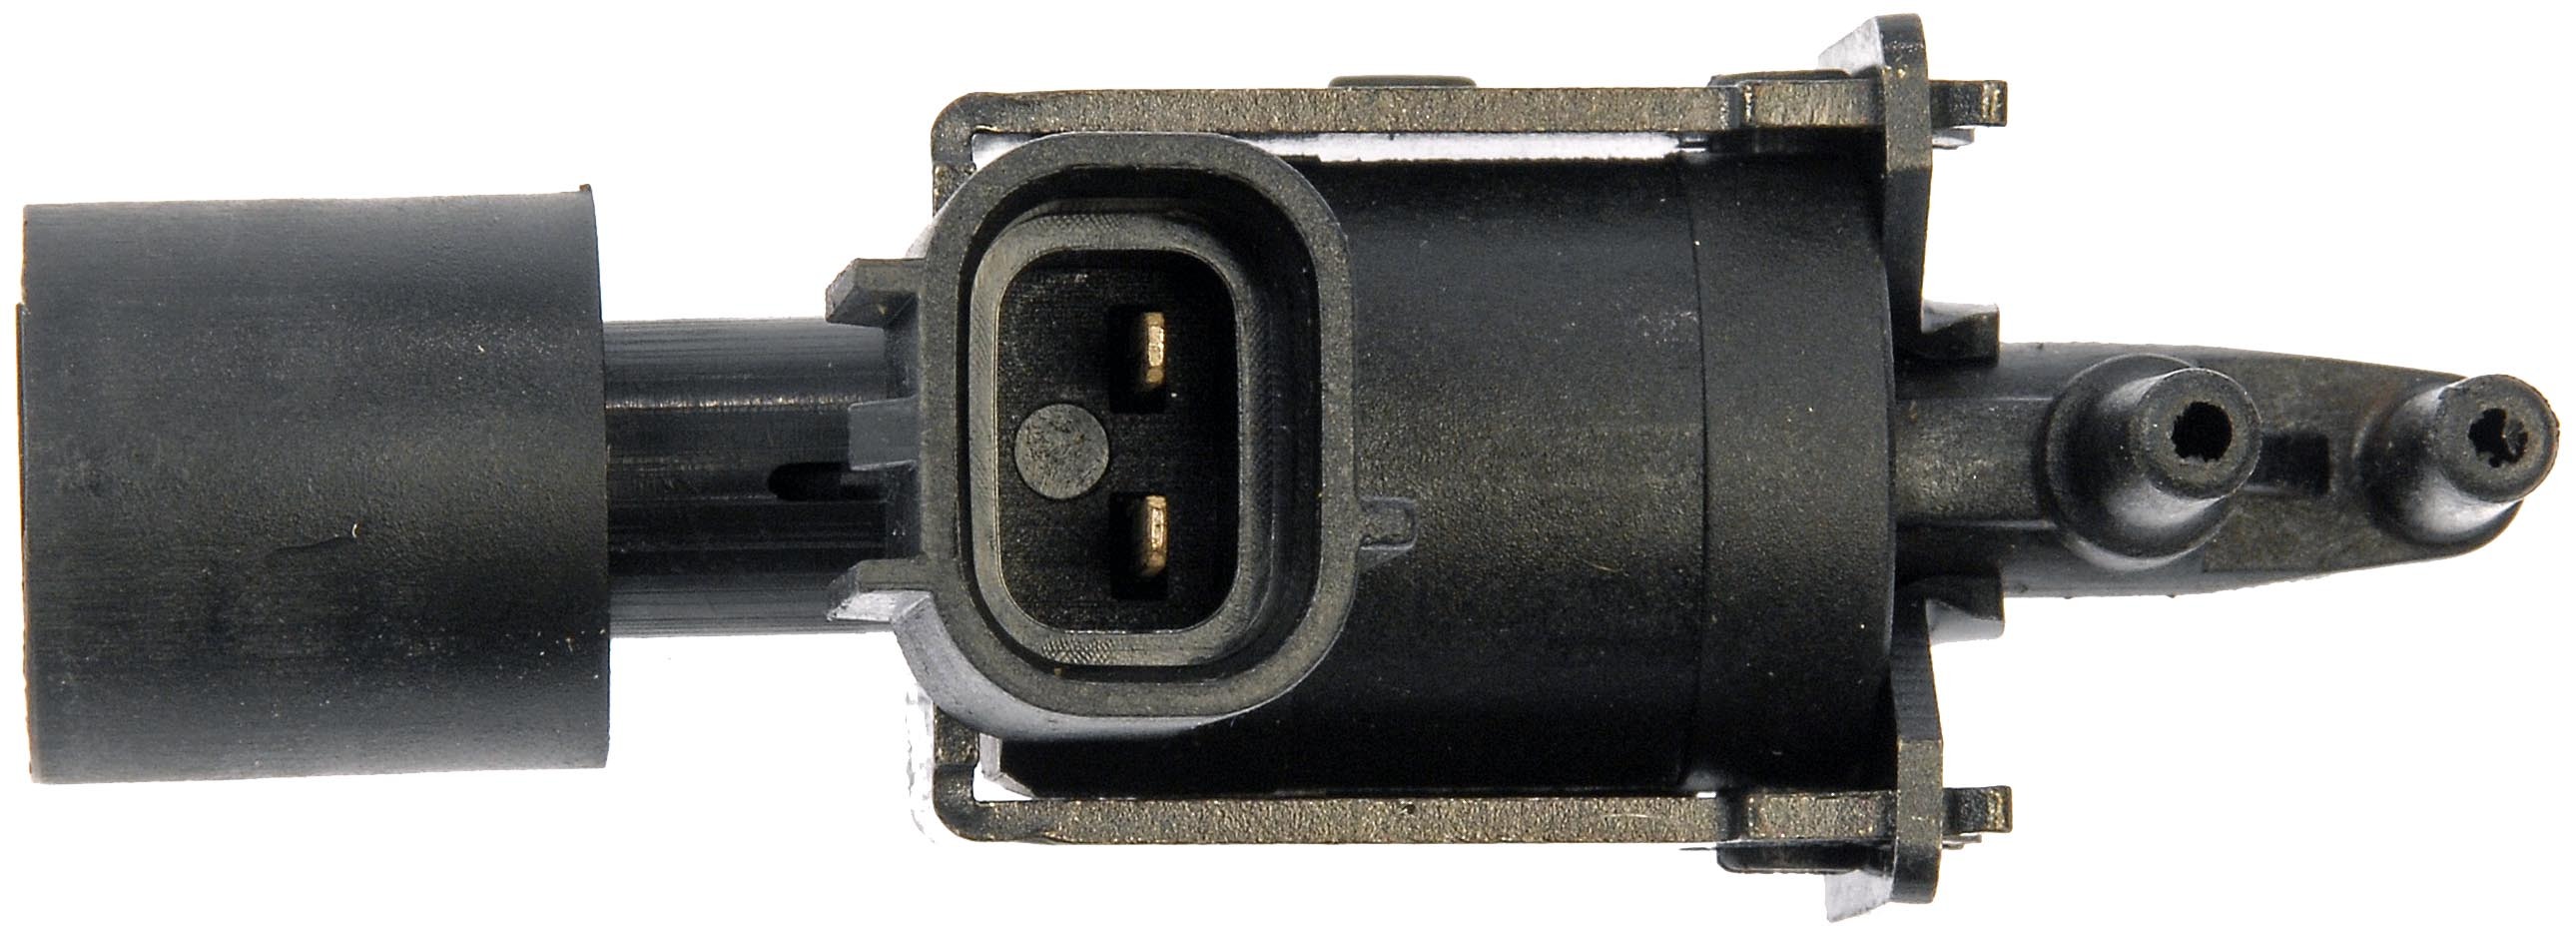 Dorman 911-612 Vacuum Switching Valve for Specific Lexus Toyota Models  Fits select: 1998-2006 TOYOTA SIENNA, 2001-2007 TOYOTA HIGHLANDER 